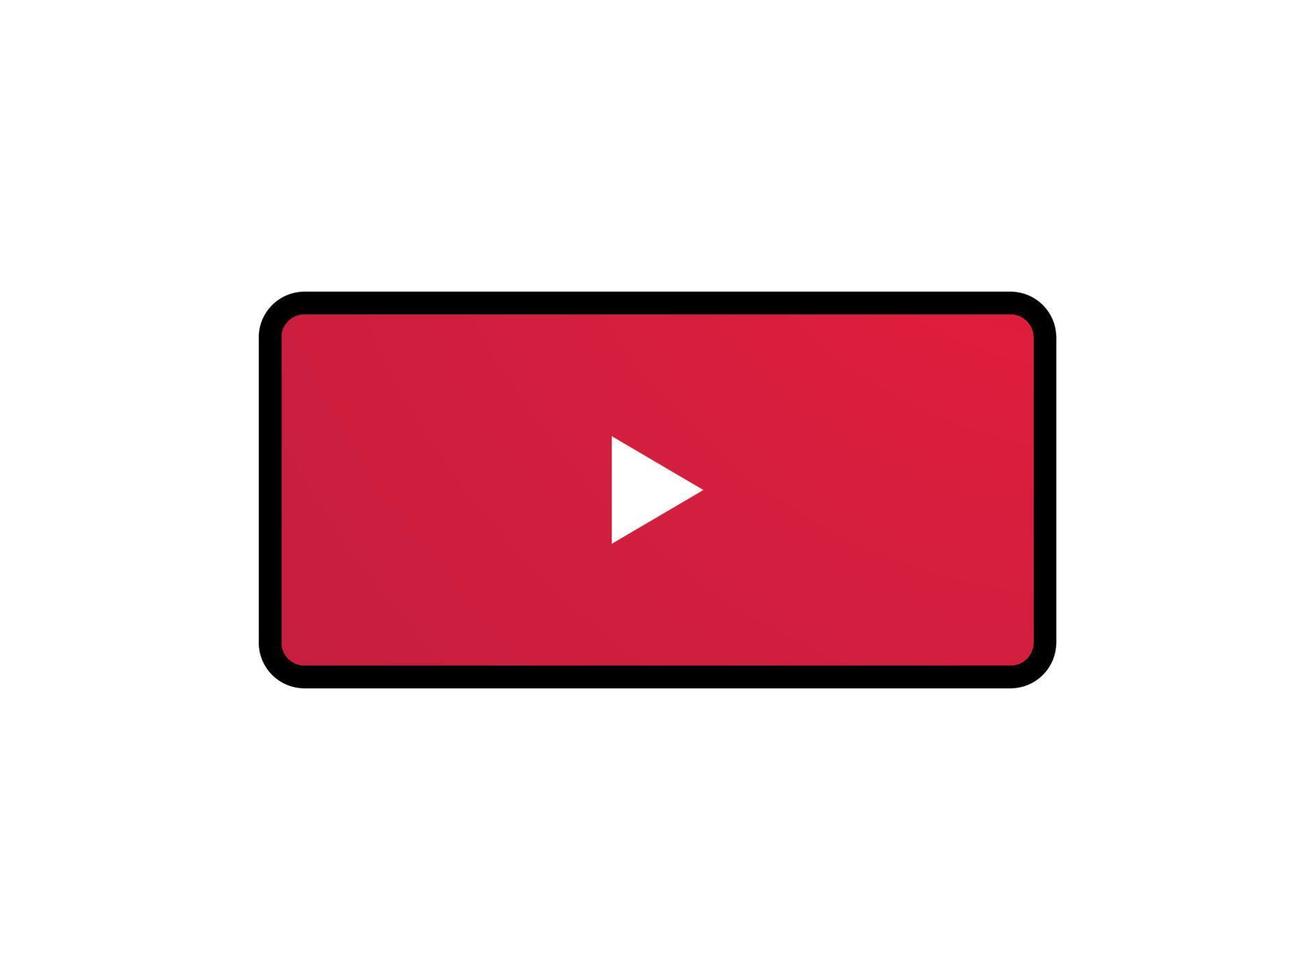 Responsive design play button and video interface on smart devices flat vector illustration.